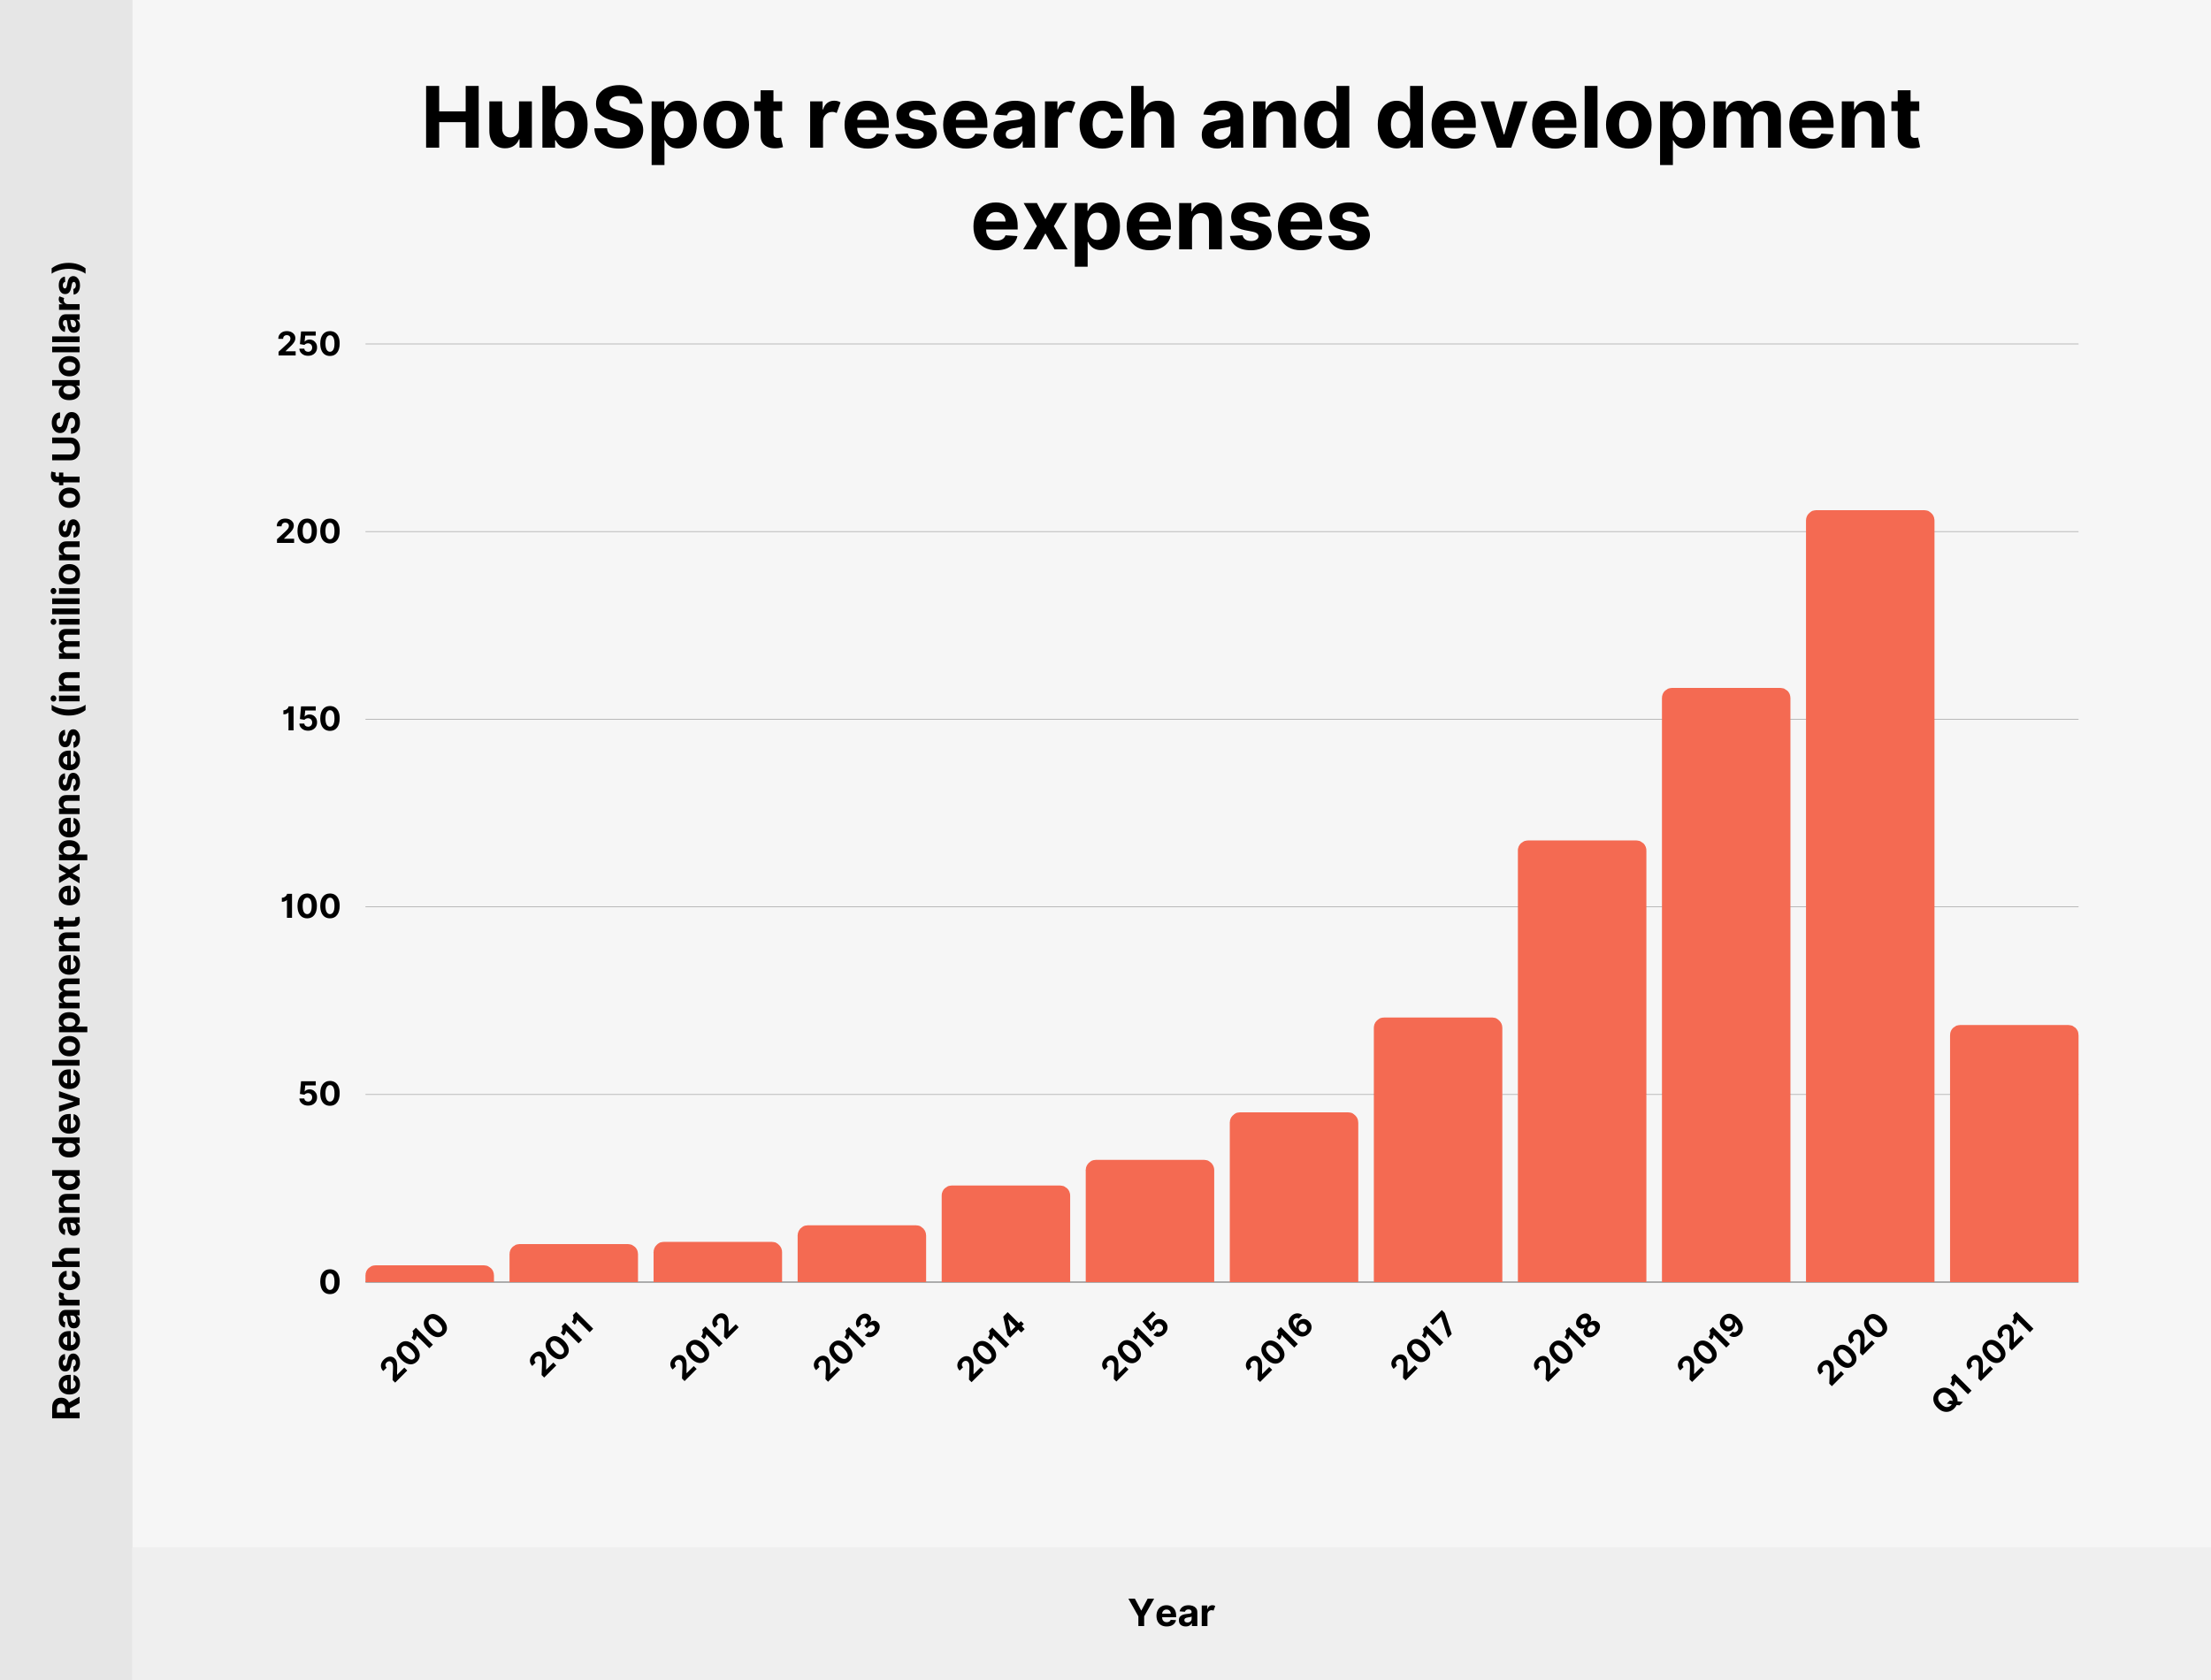 HubSpot research and development expenses